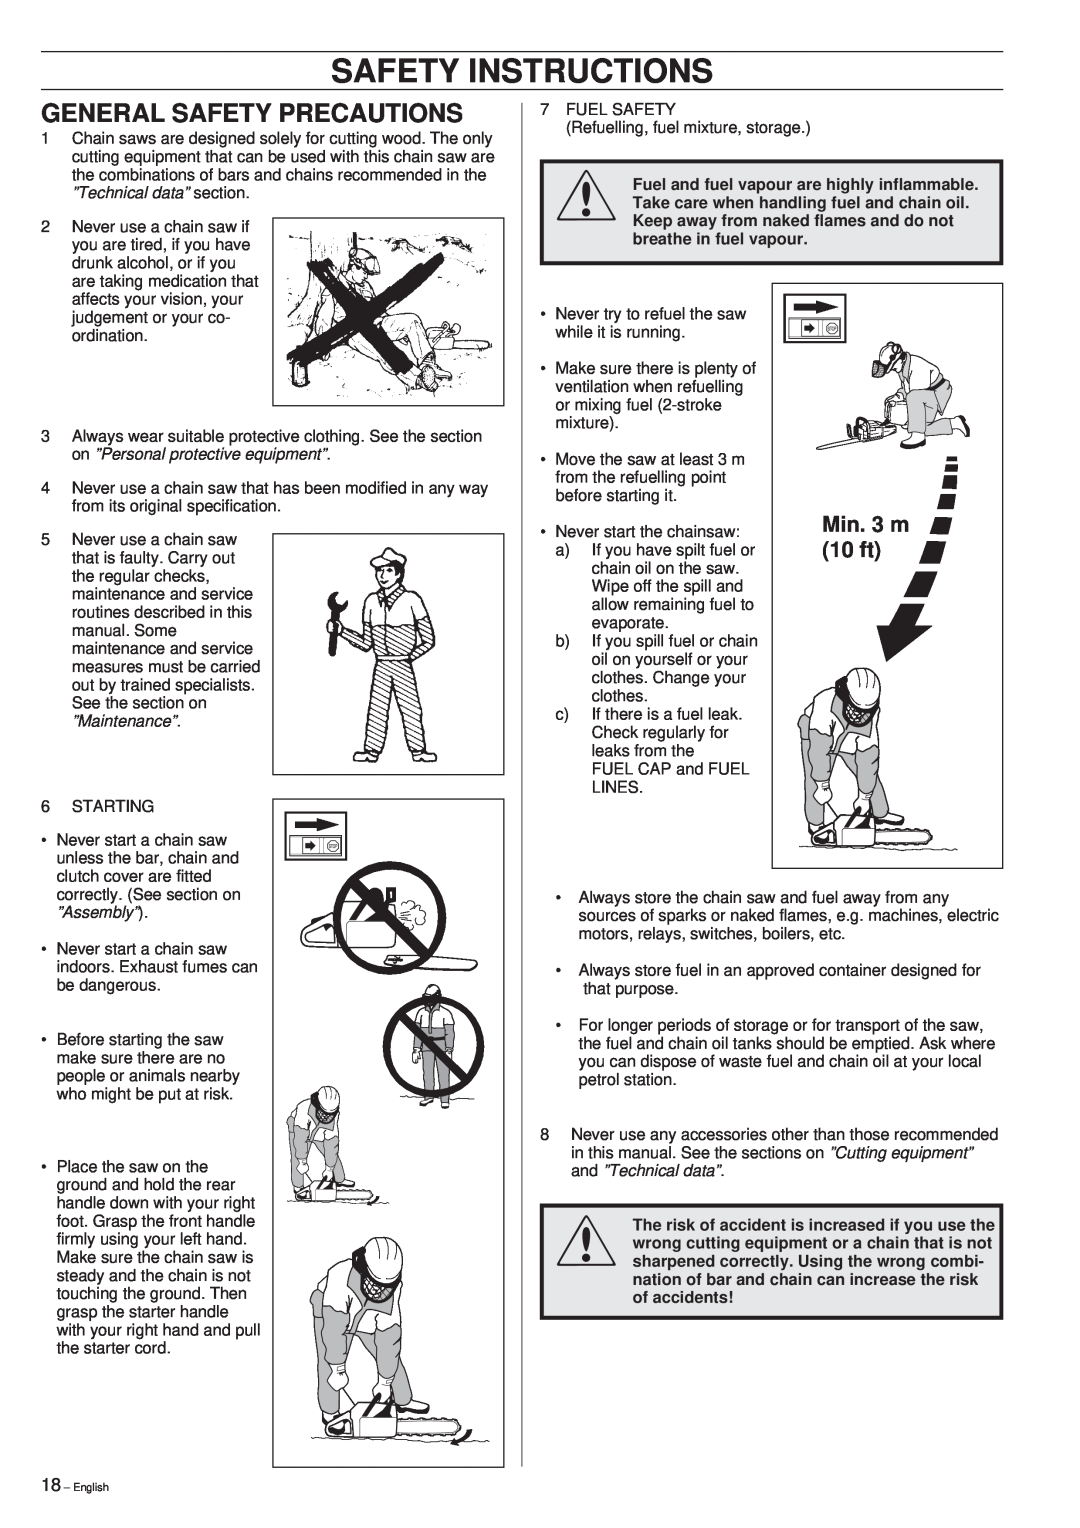 Husqvarna 261 manual Safety Instructions, Min. 3 m, 10 ft, ”Technical data” section, on ”Personal protective equipment” 